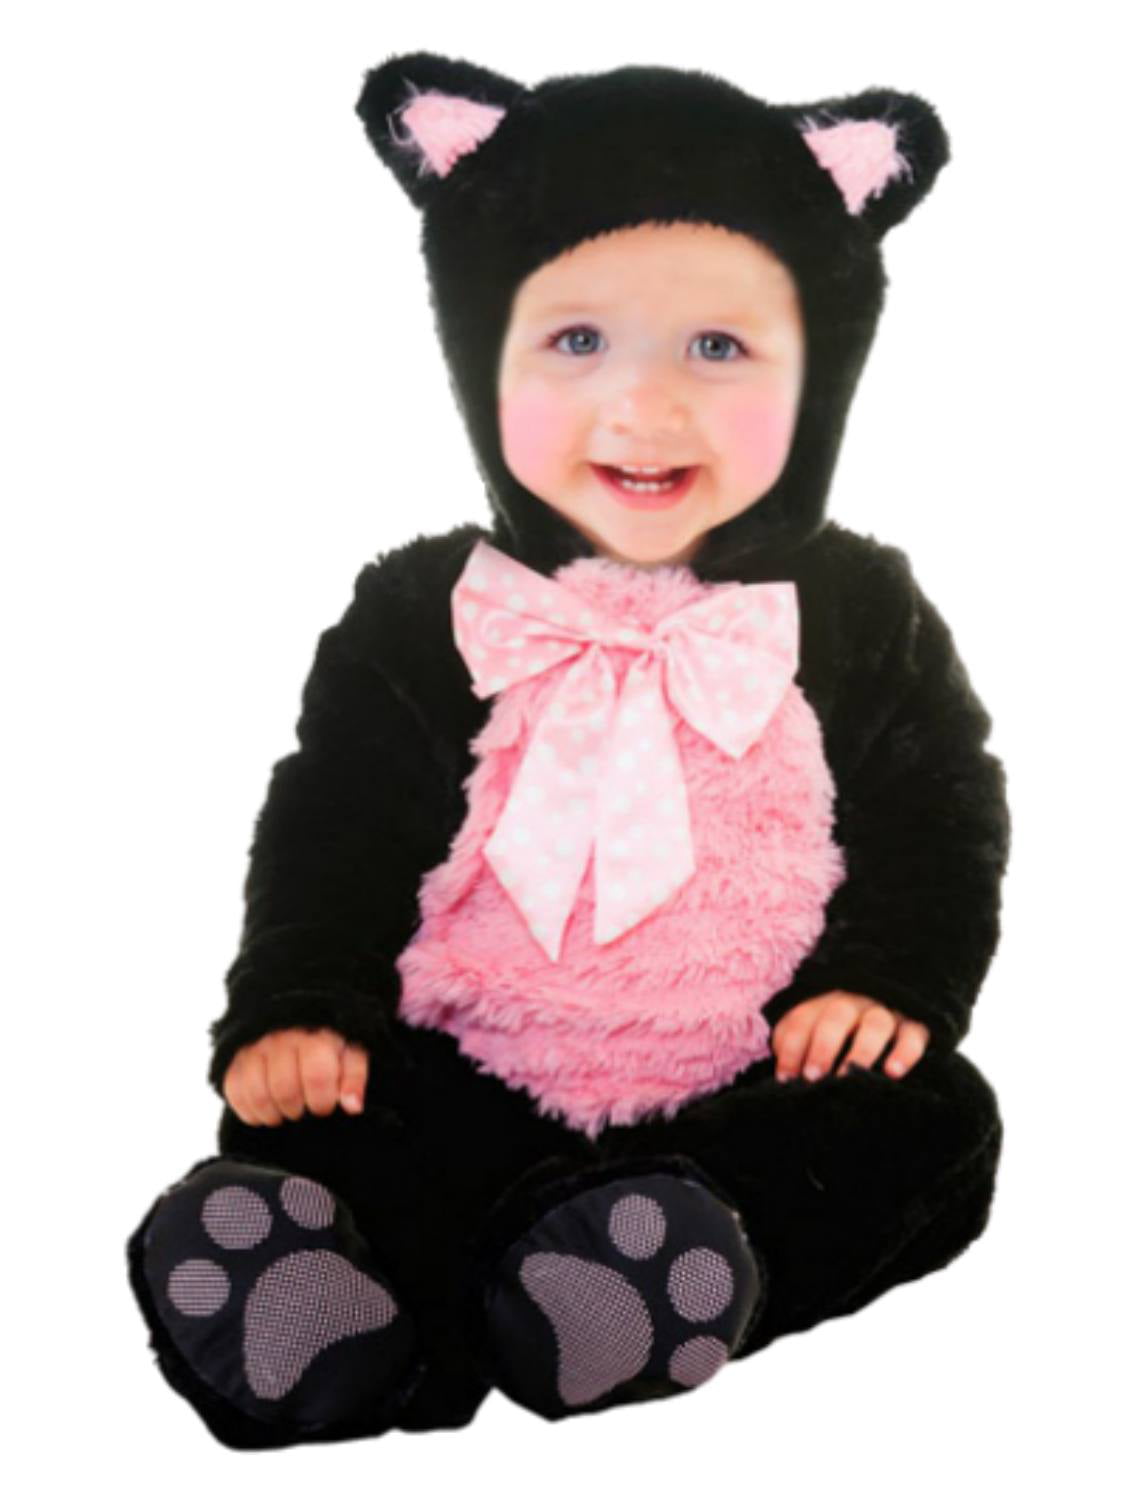 Kitty Cat Cutie Infant Halloween Costume Size 0-6 6-12 12-18 months Dress Up NEW 